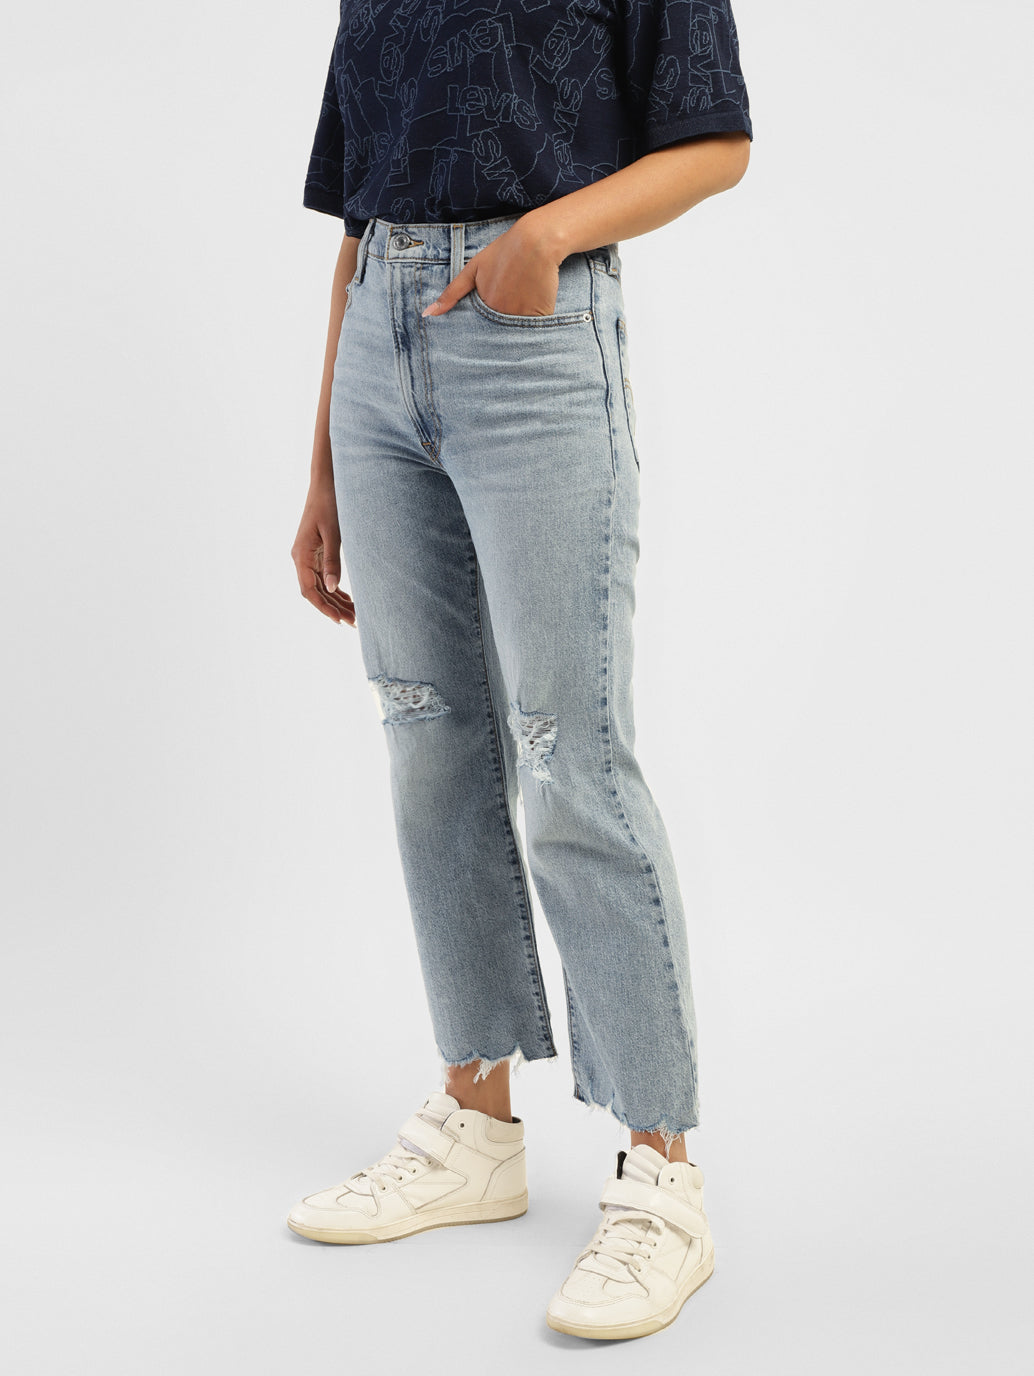 Women's High Rise Ribcage Cropped Bootcut Jeans